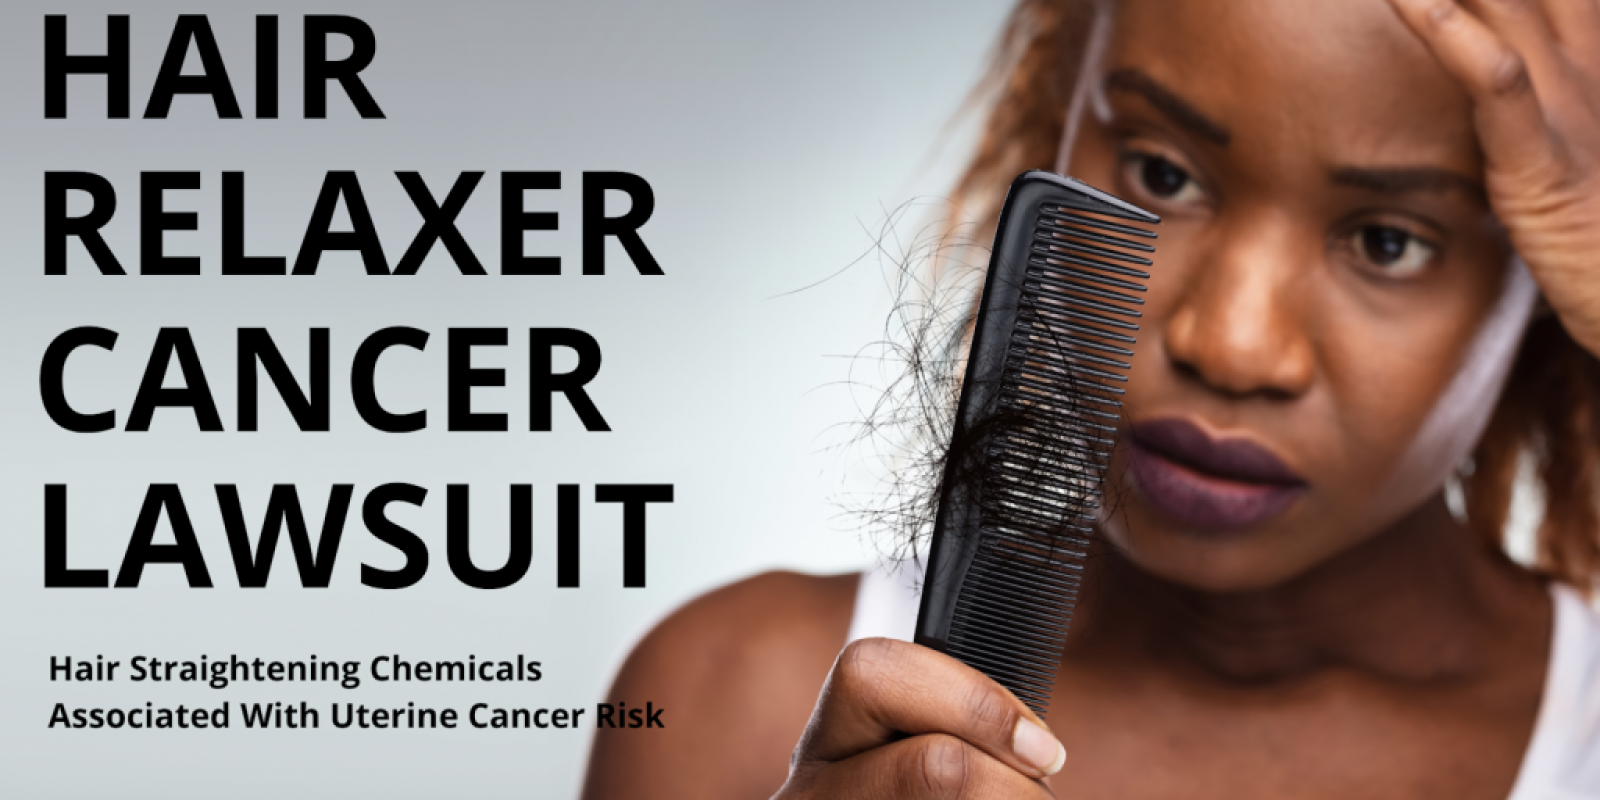 Hair Relaxer Cancer Lawsuit